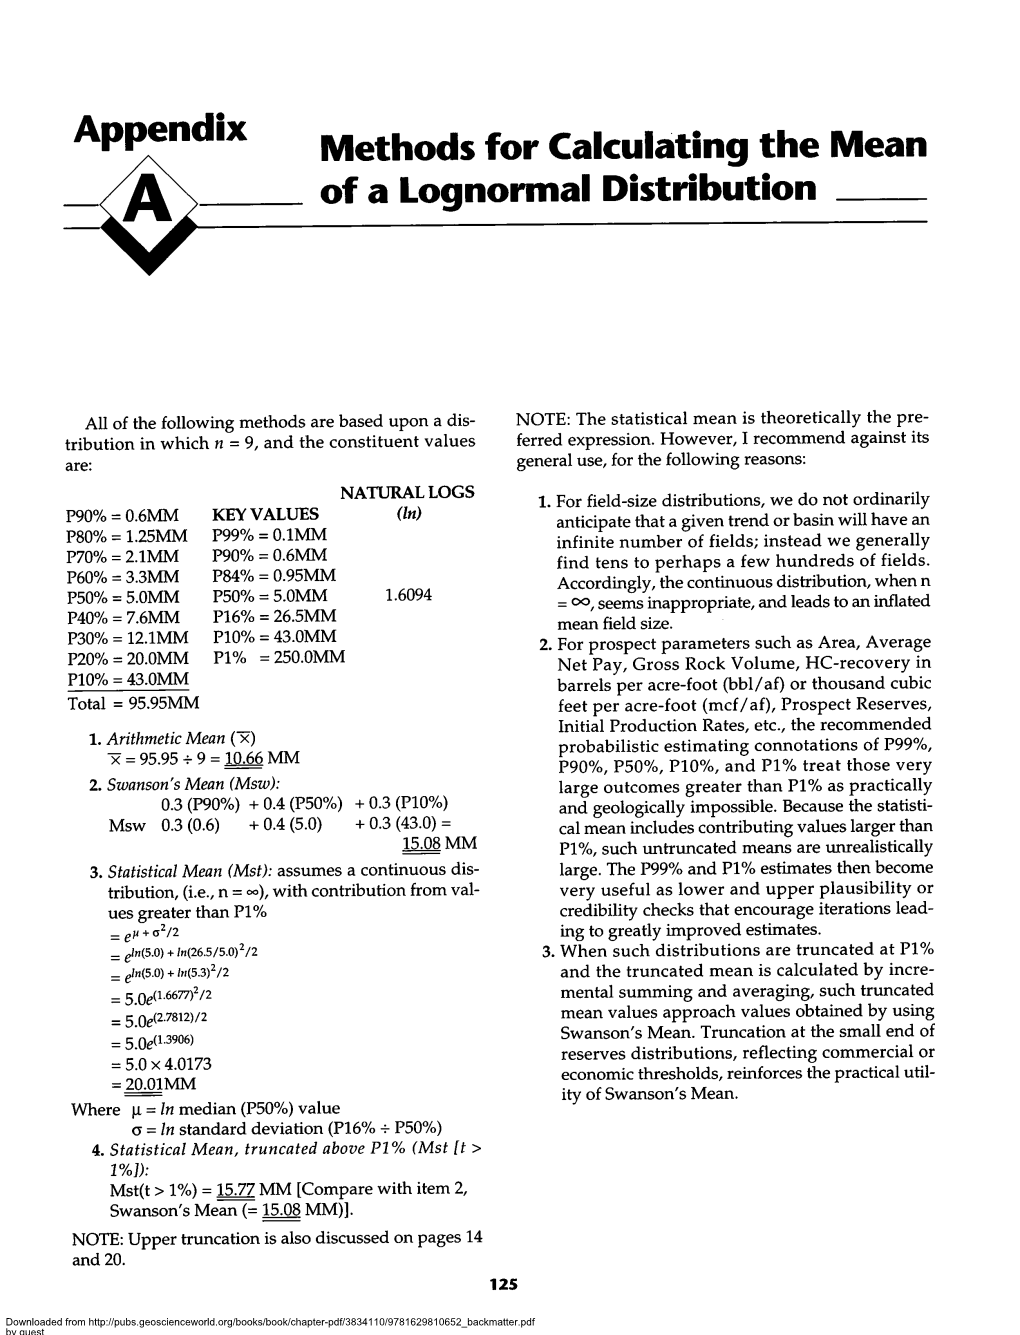 Appendix Methods for Calculating the Mean of a Lognormal Distribution